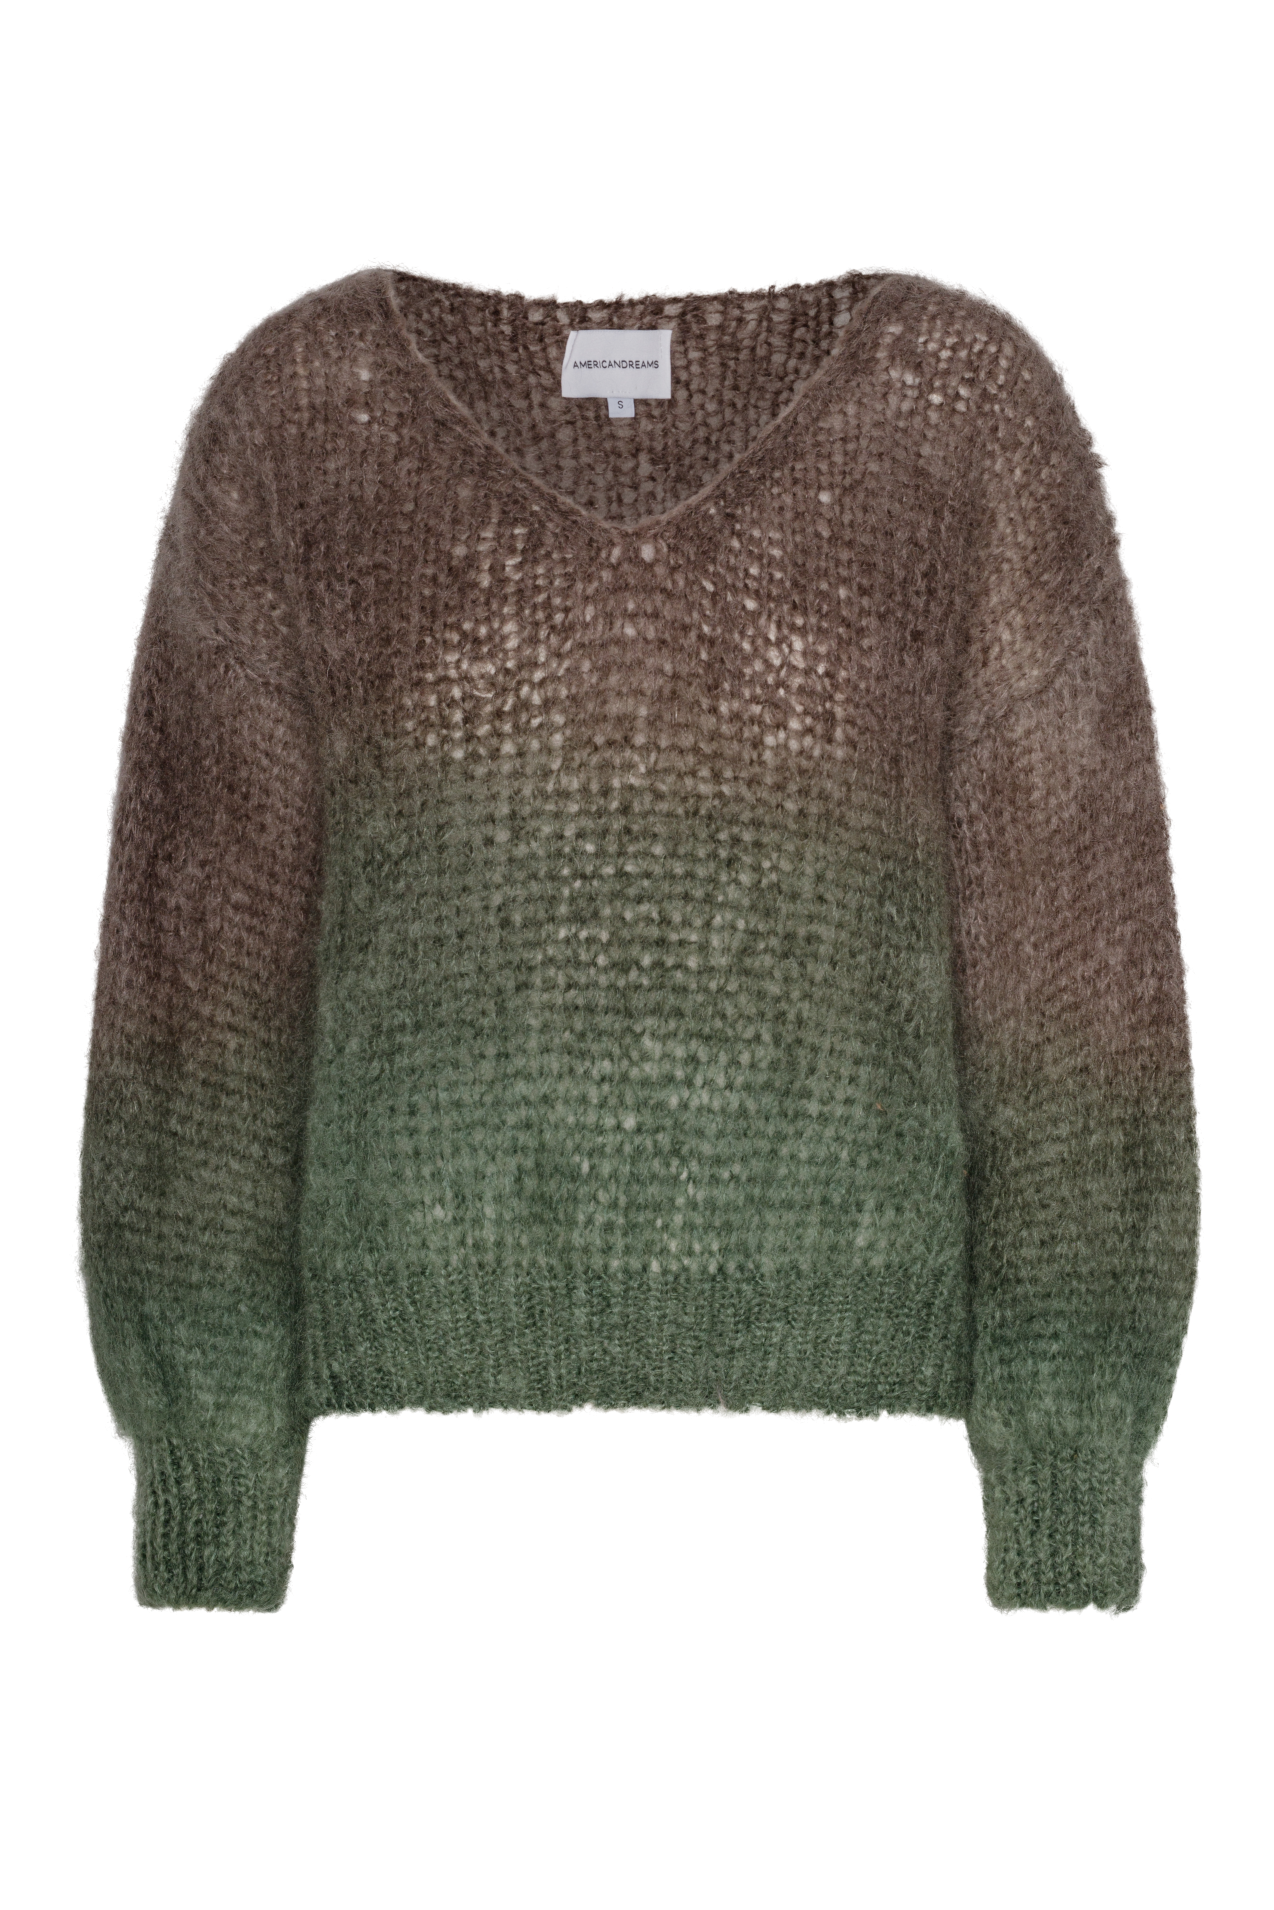 Milana LS Mohair Knit Ombre Dark Taupe/Green